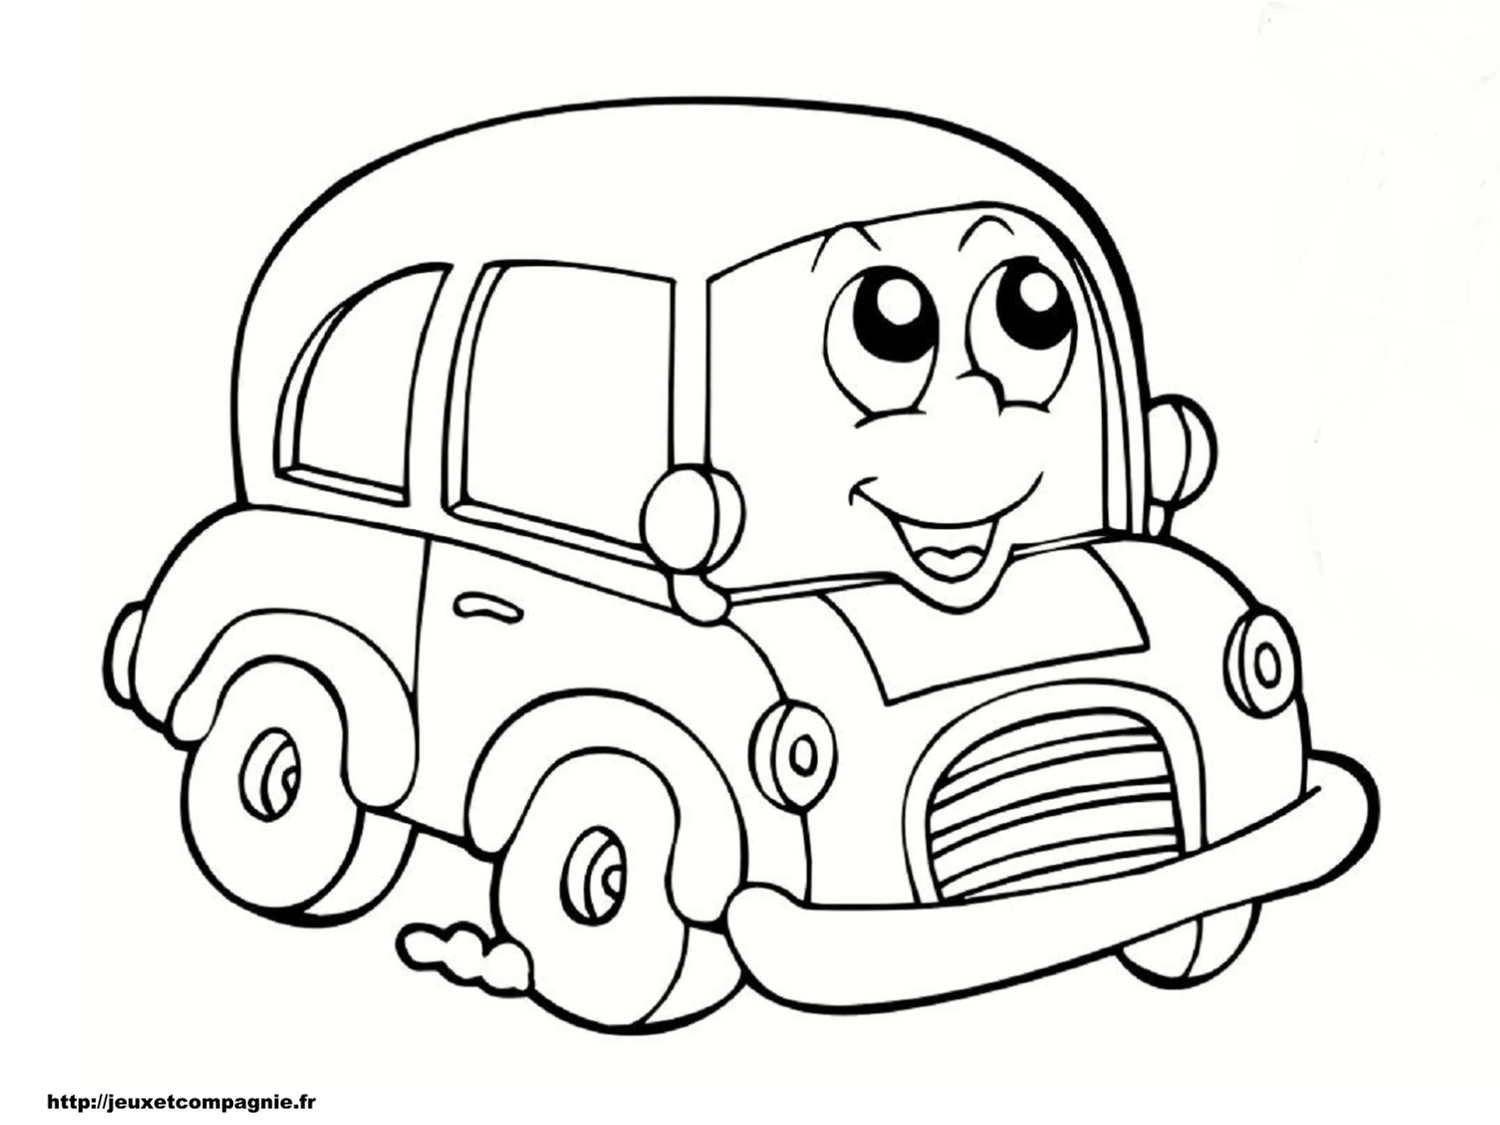 46-best-ideas-for-coloring-car-coloring-pages-for-preschoolers